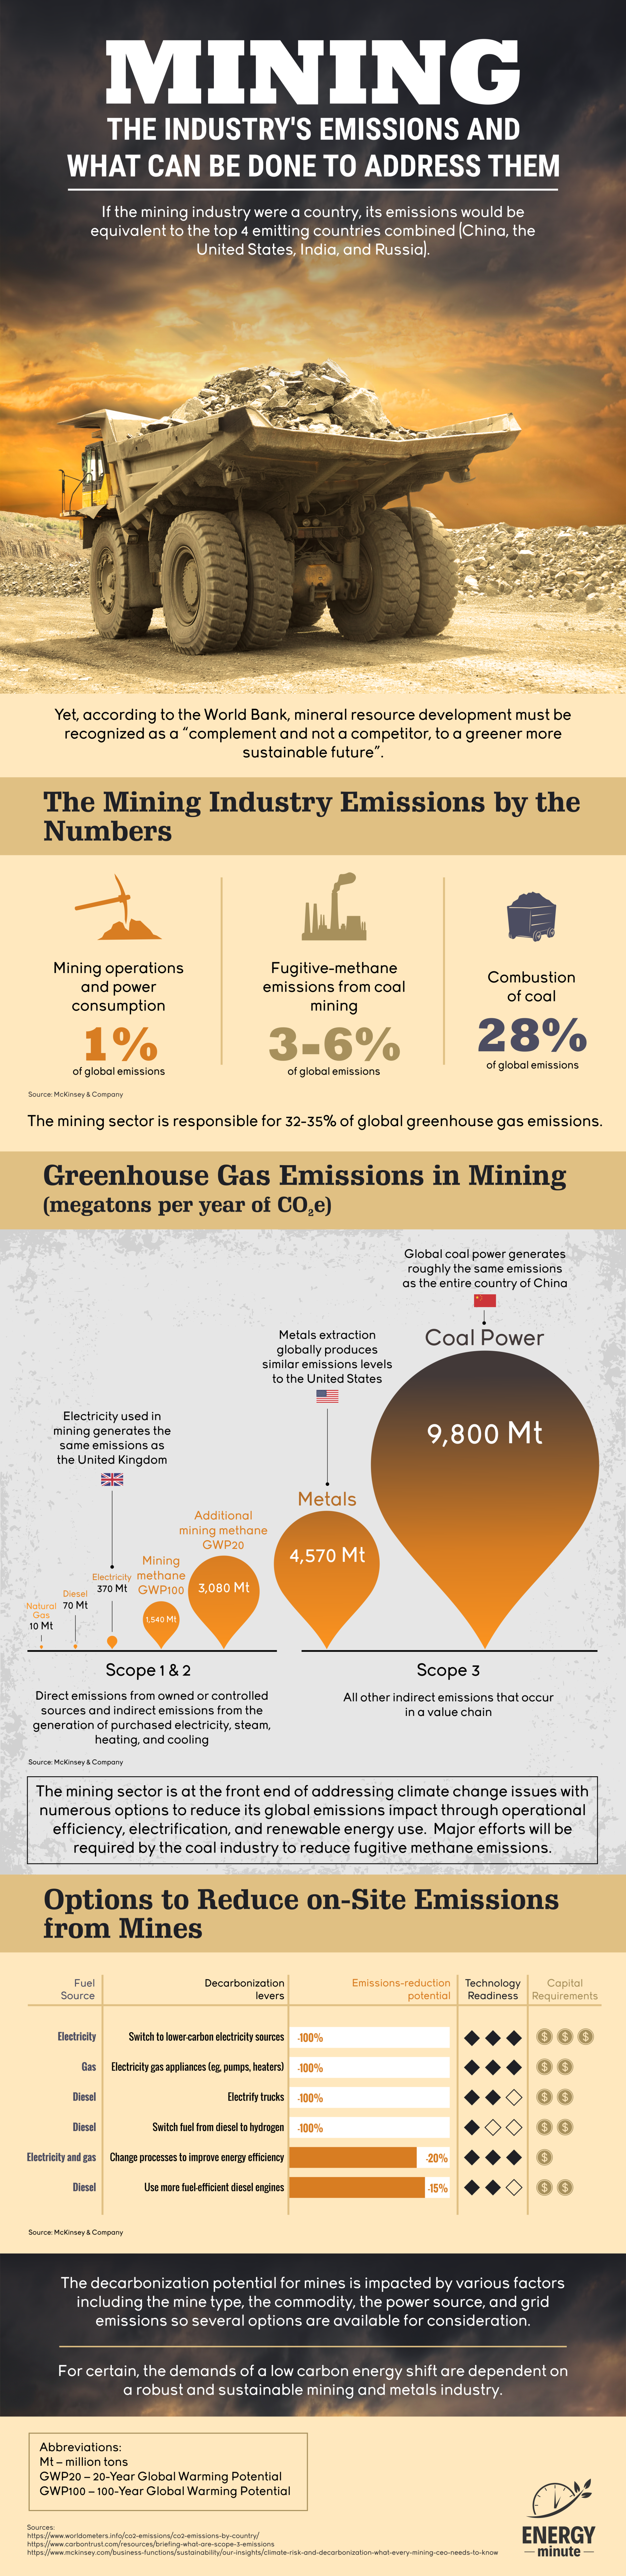 Mining Emissions and How They Can be Addressed